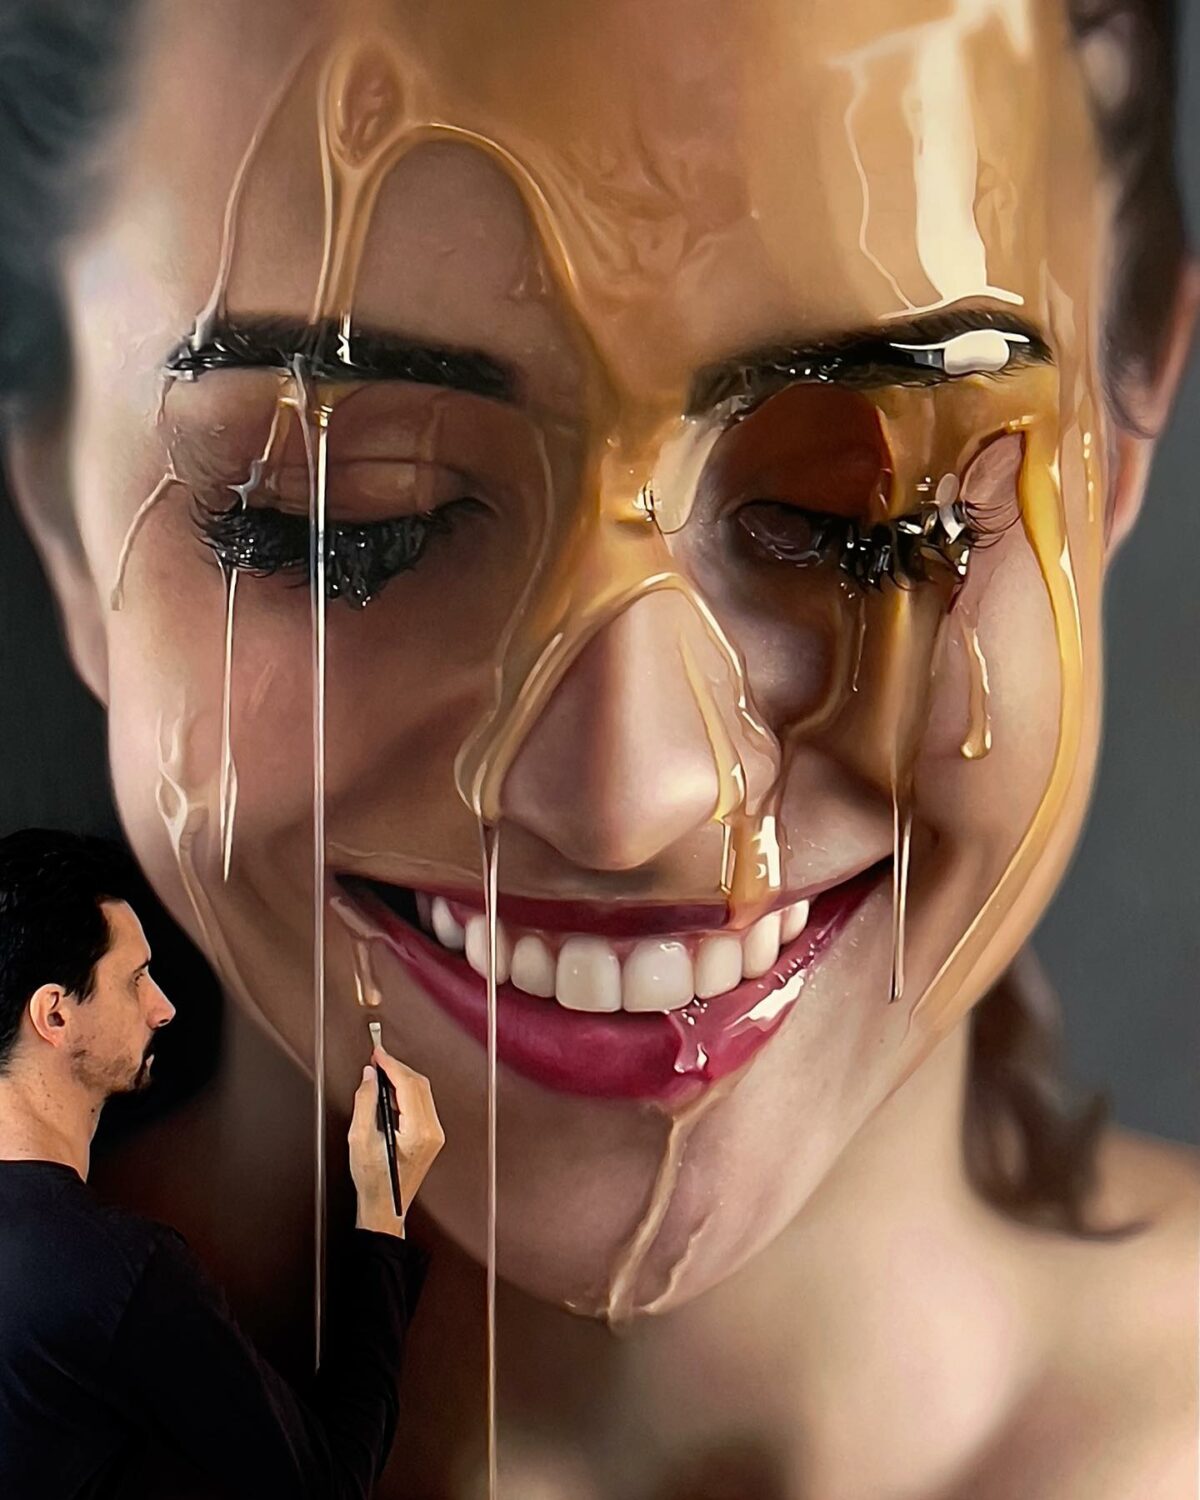 Incredible Hyper Realistic Portraits Of Girls Covered With Honey By Fabiano Millani 4